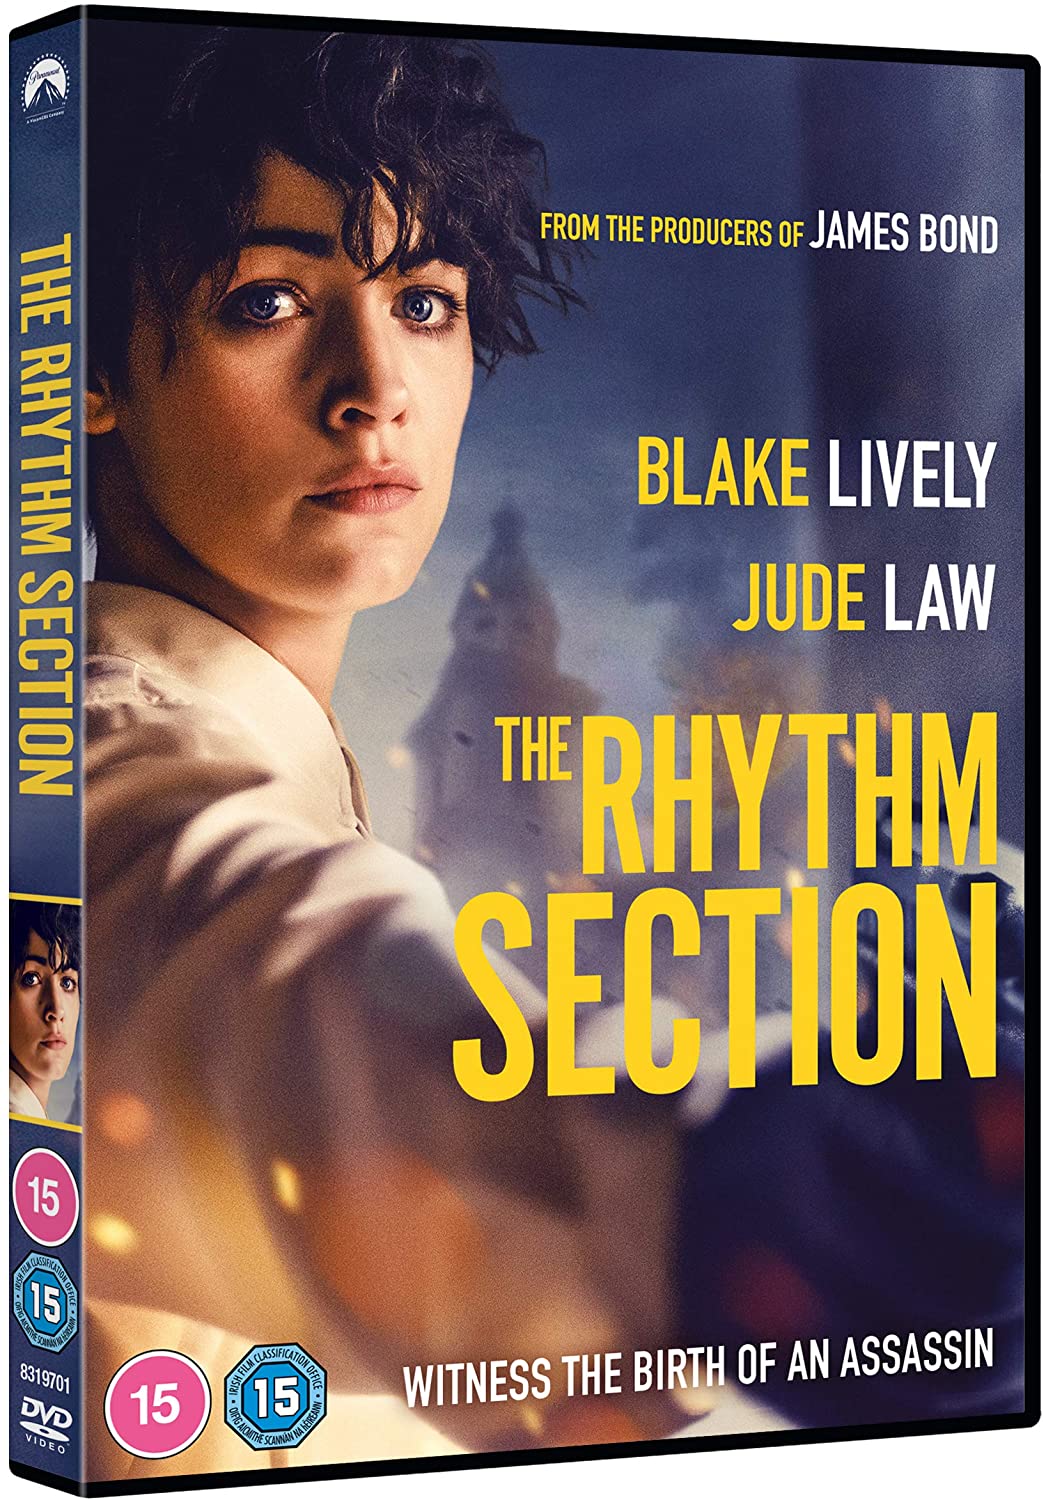 The Rhythm Section - Thriller/Action [DVD]